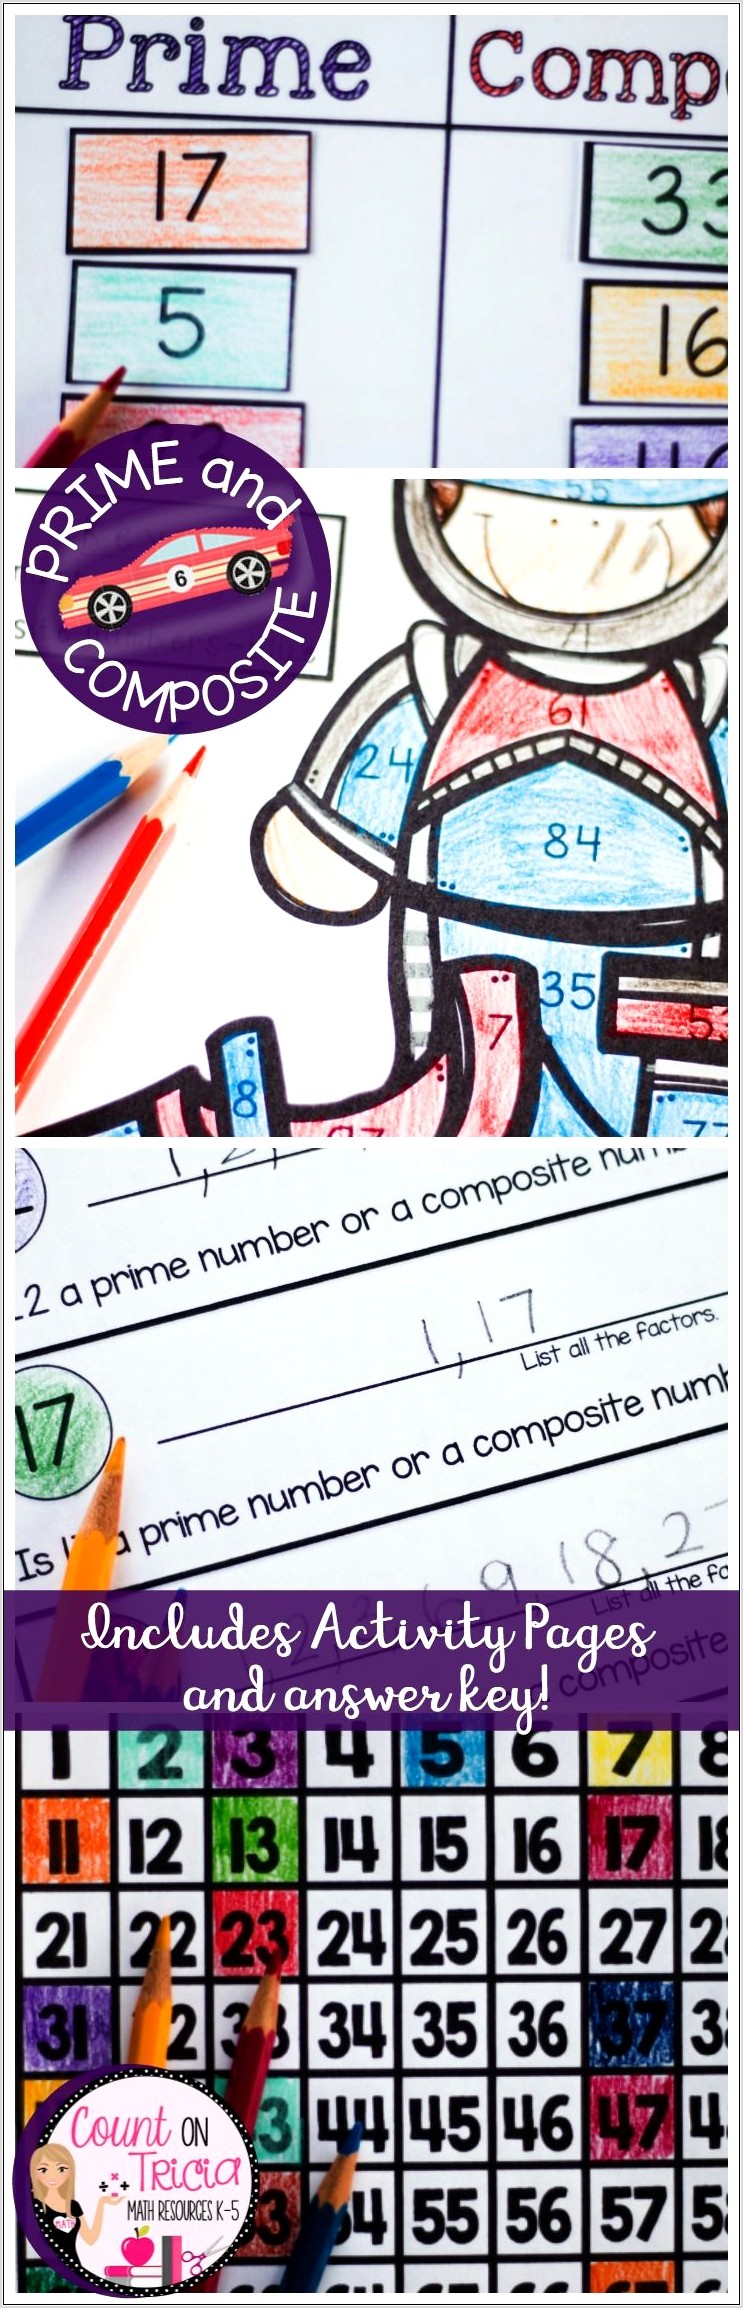 Worksheet On Prime Numbers And Composite